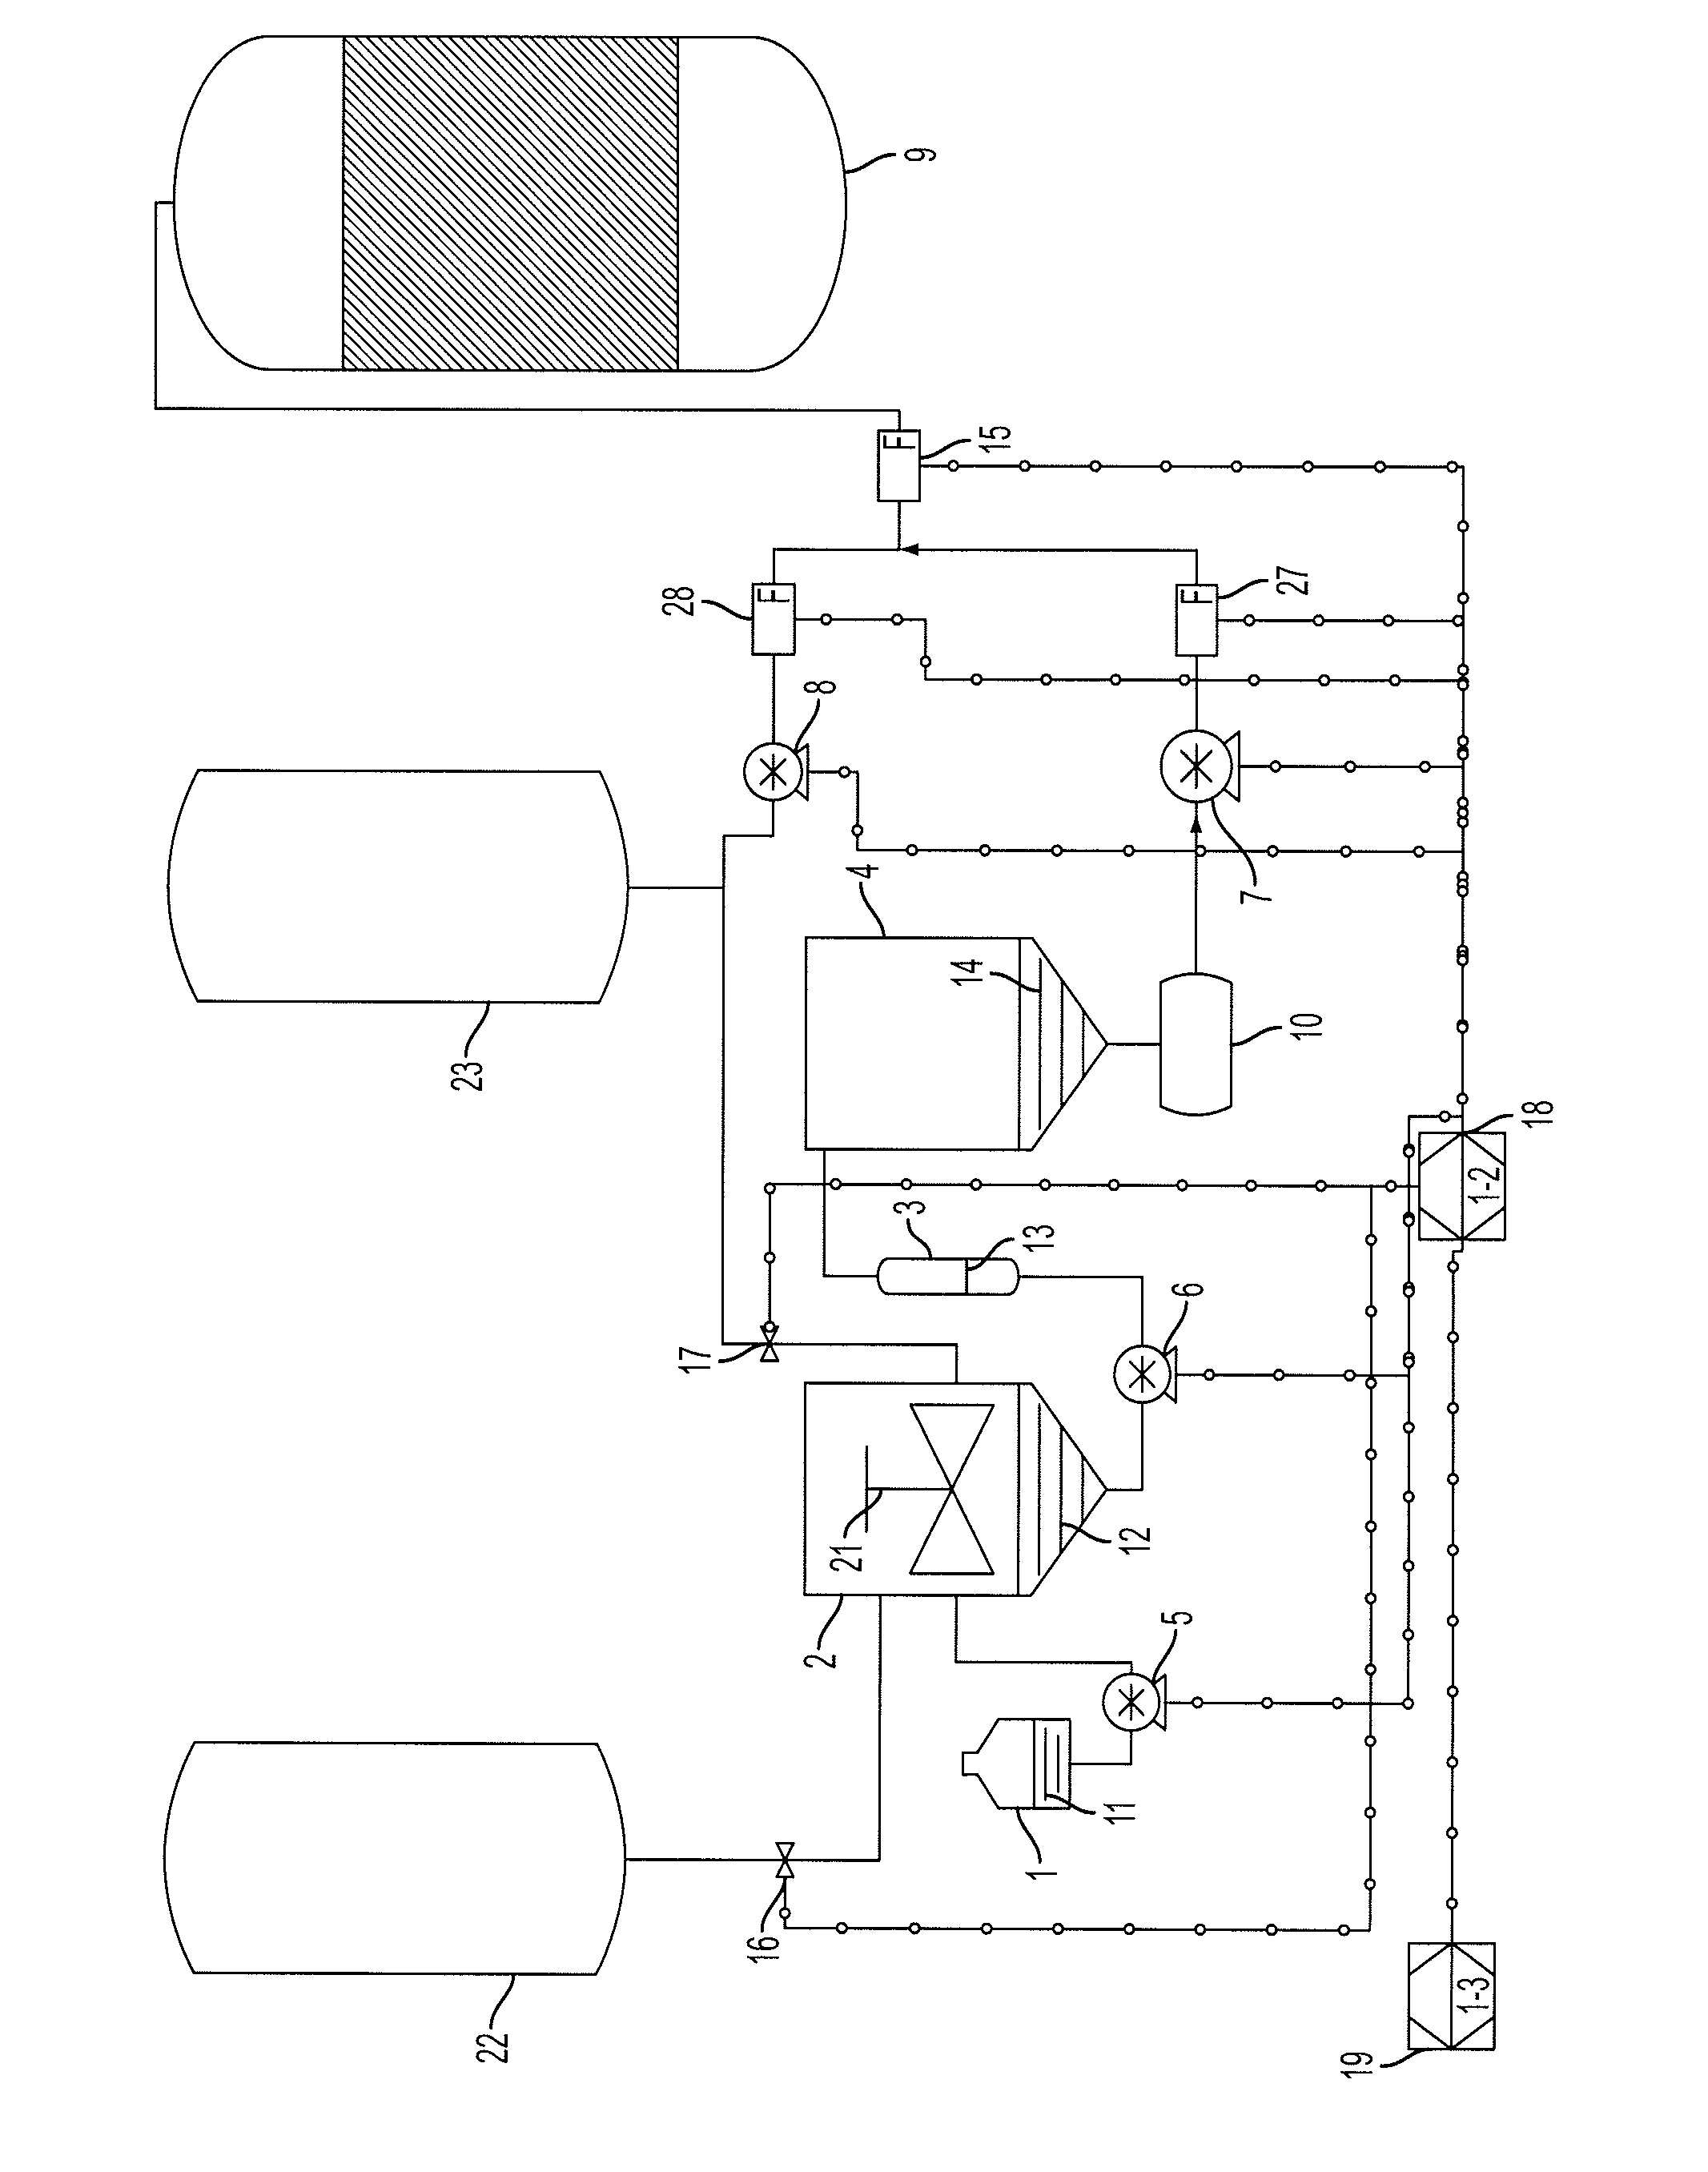 Method and apparatus for producing alcohol or sugar using a commercial-scale bioreactor